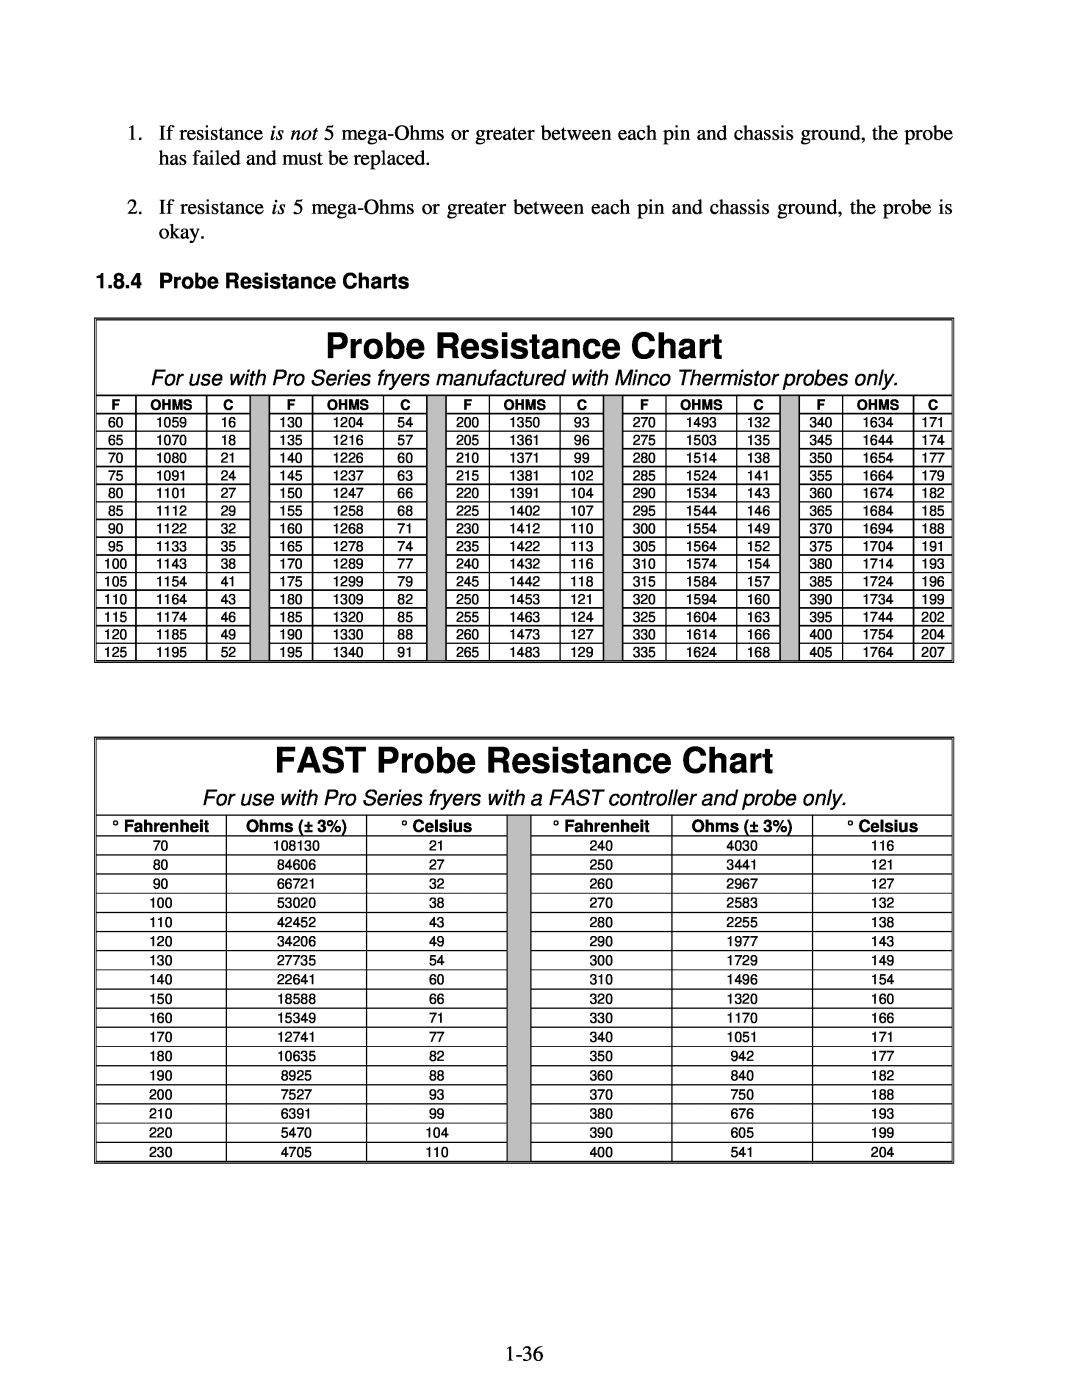 Frymaster H50 manual 1.8.4Probe Resistance Charts, FAST Probe Resistance Chart 